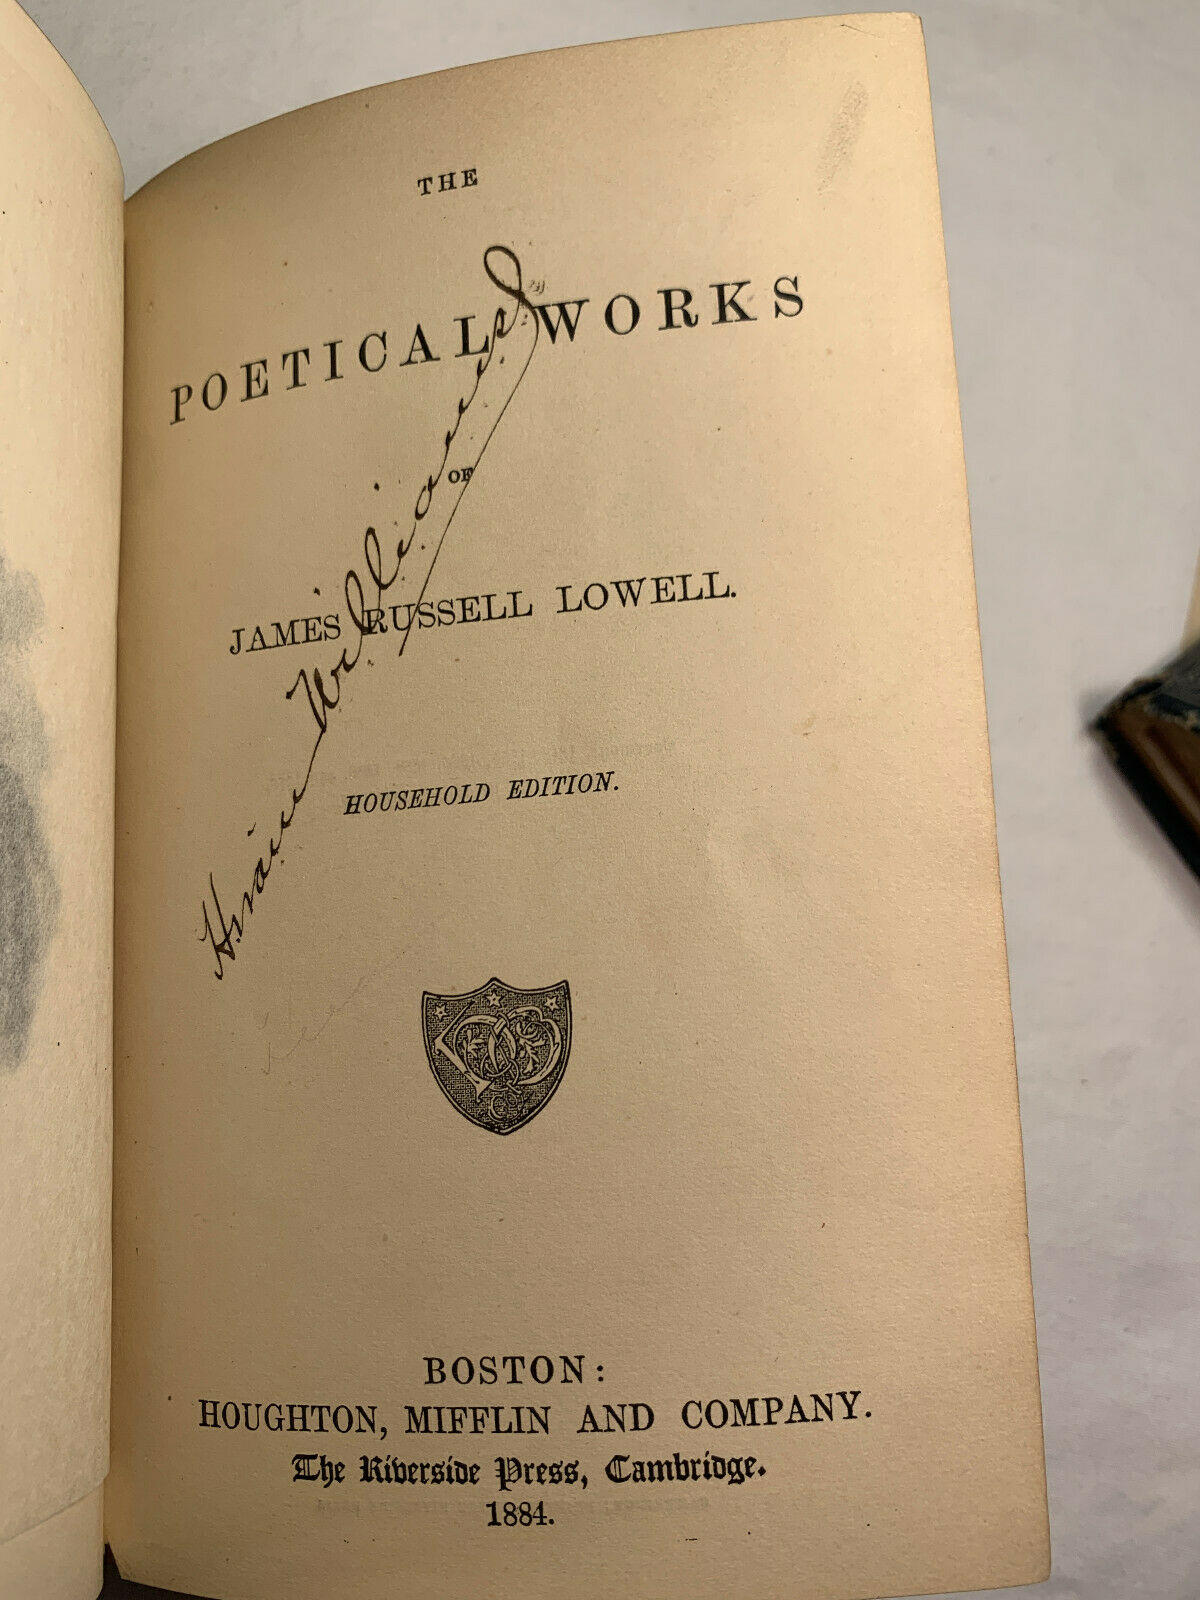 Lowell's Poems: The Poetical Works of James Russell Lowell 1884